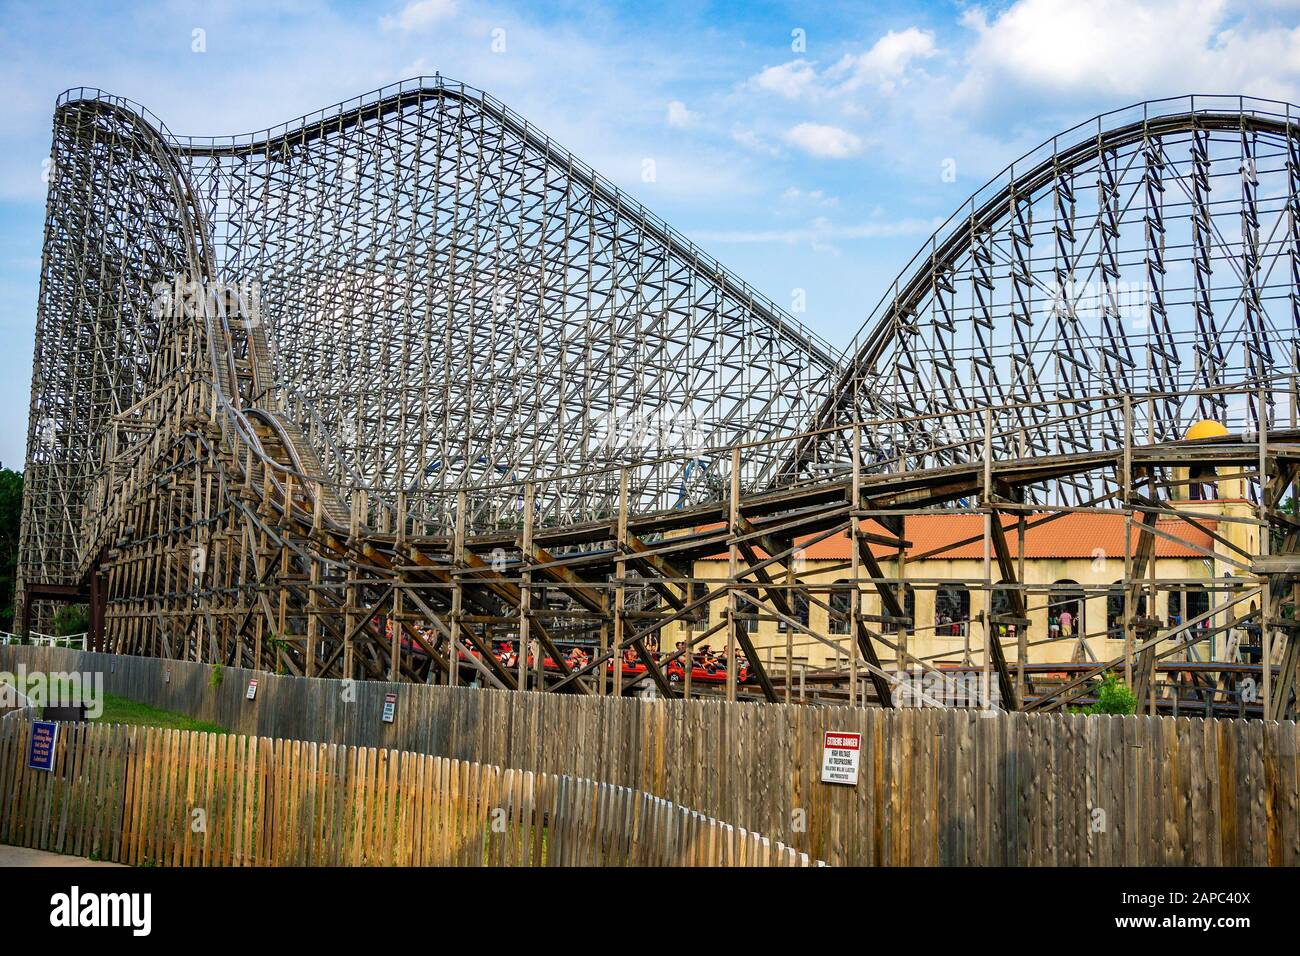 The famous wooden roller coaster the El Toro at Six Flags Great Adventure's  in Jackson Township, NJ Stock Photo - Alamy